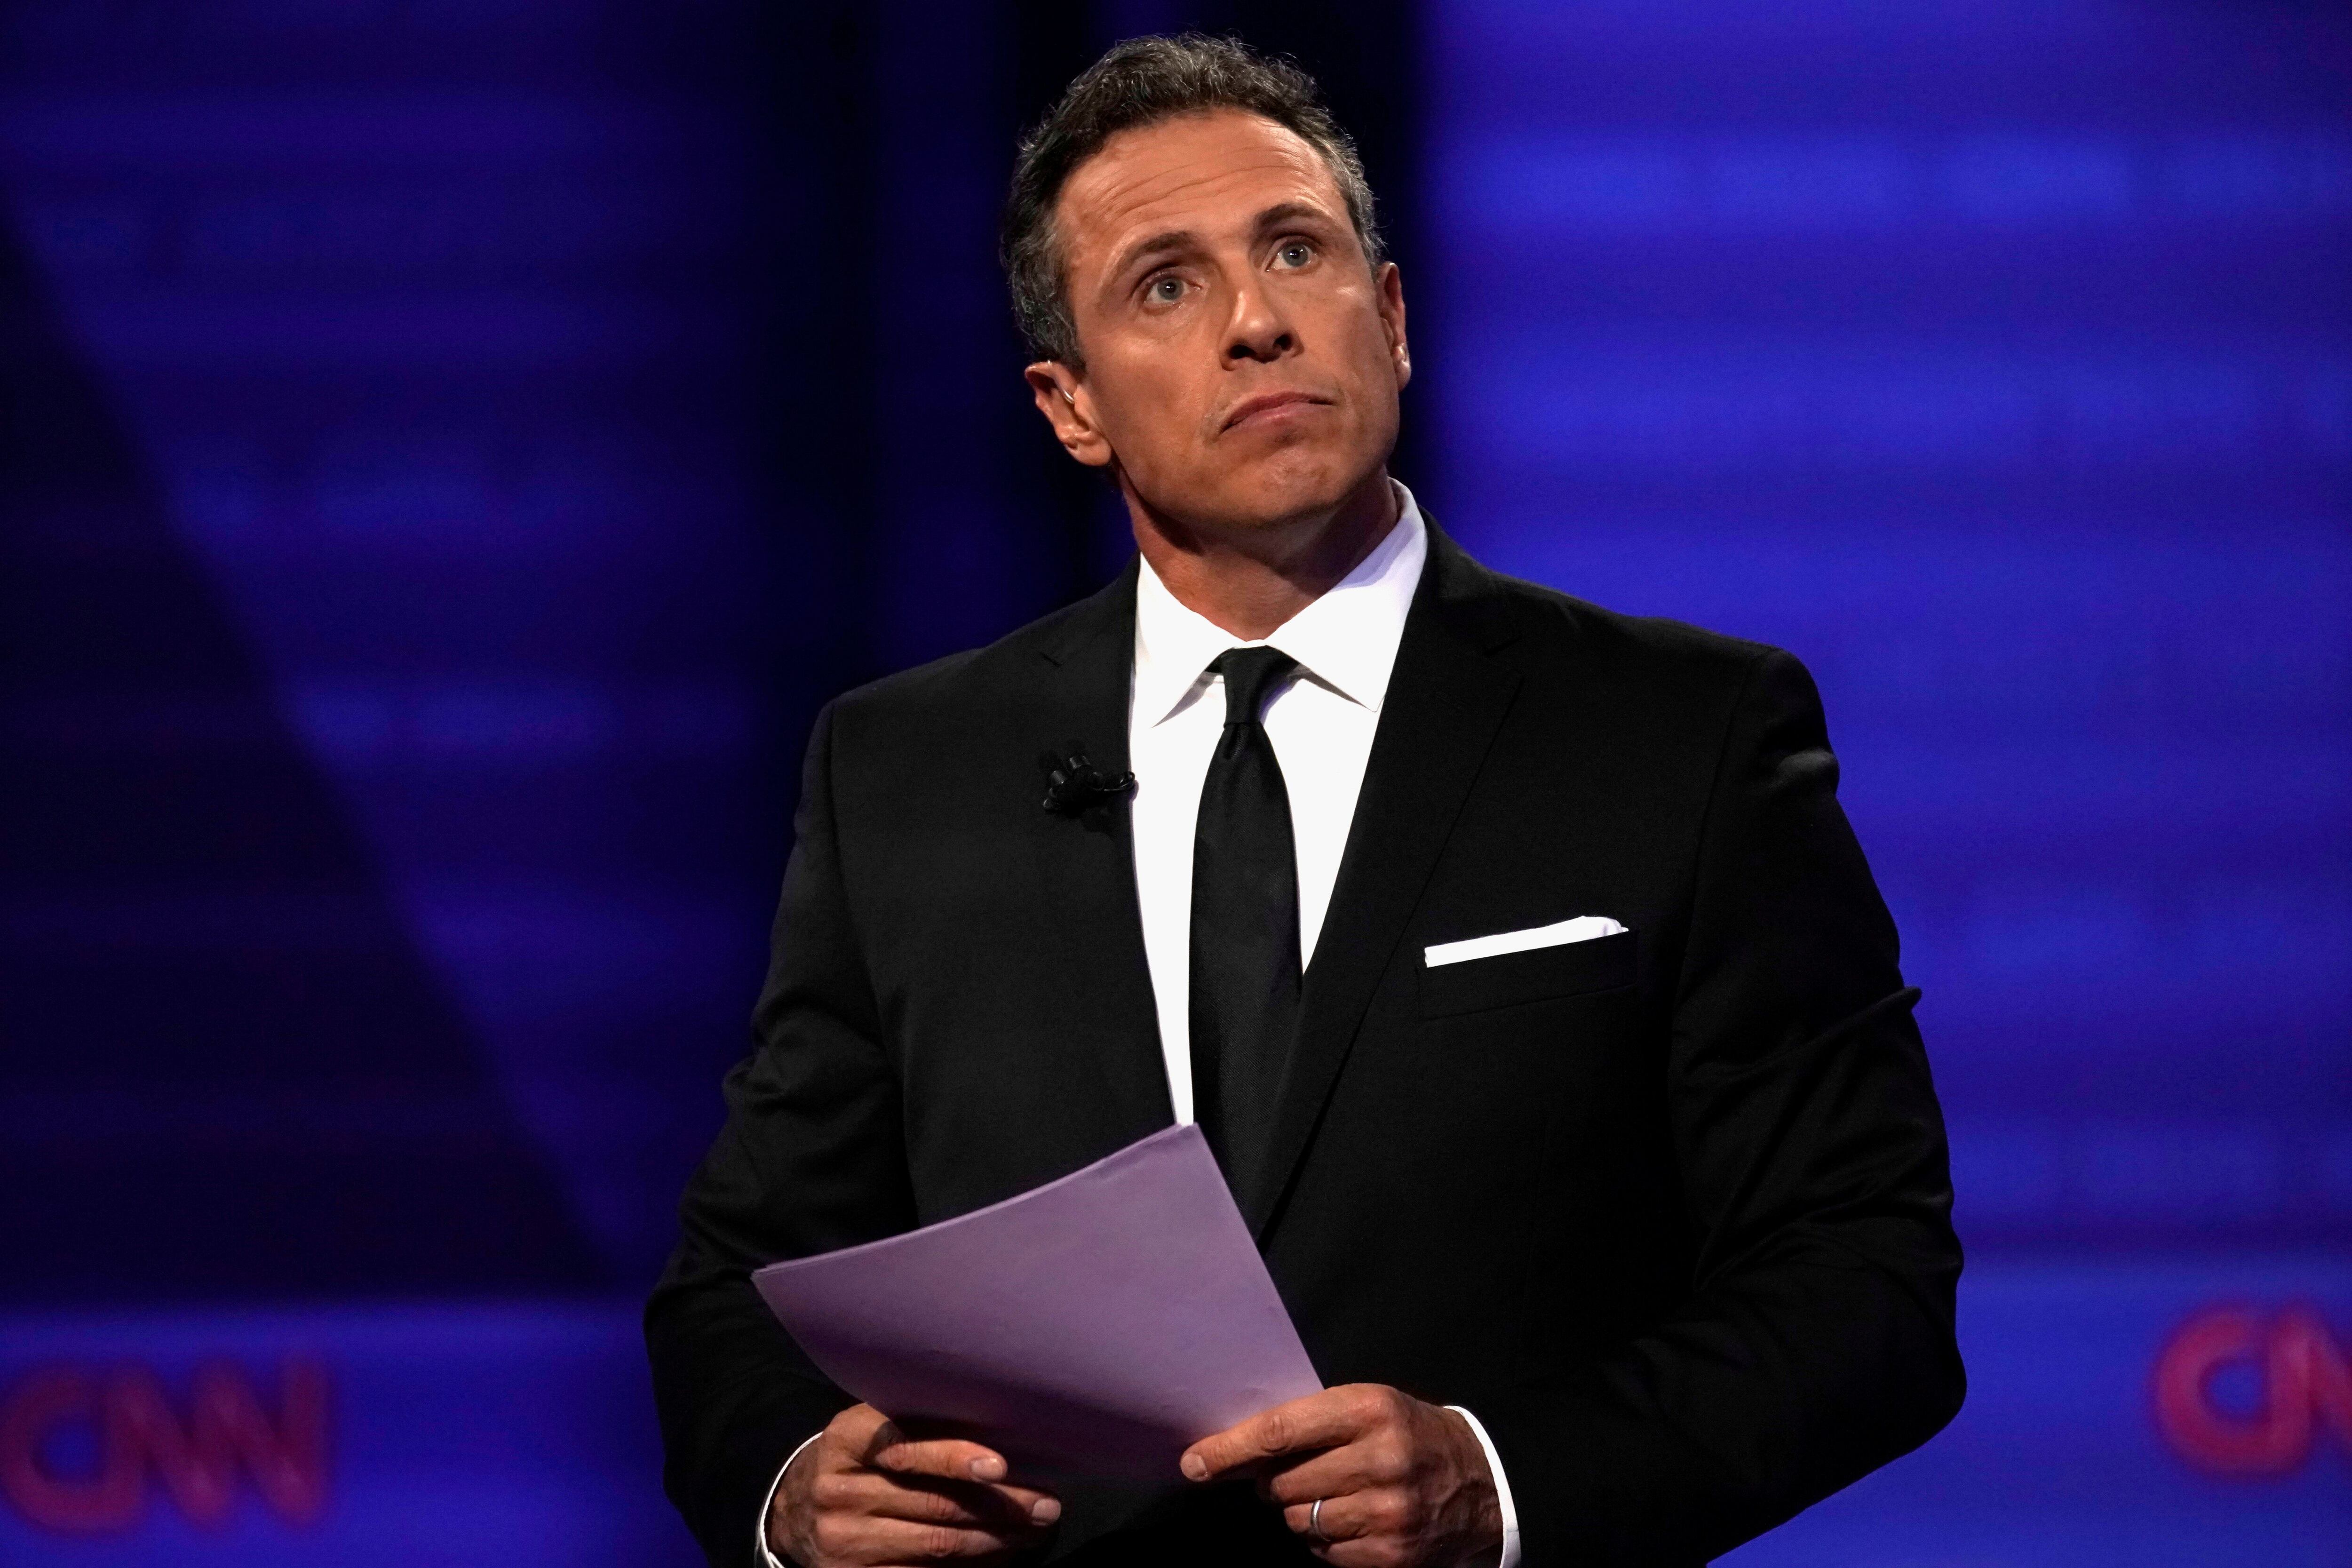 CNN fired host Chris Cuomo for interfering on behalf of his brother, the former New York governor, in a sex scandal (Reuters)